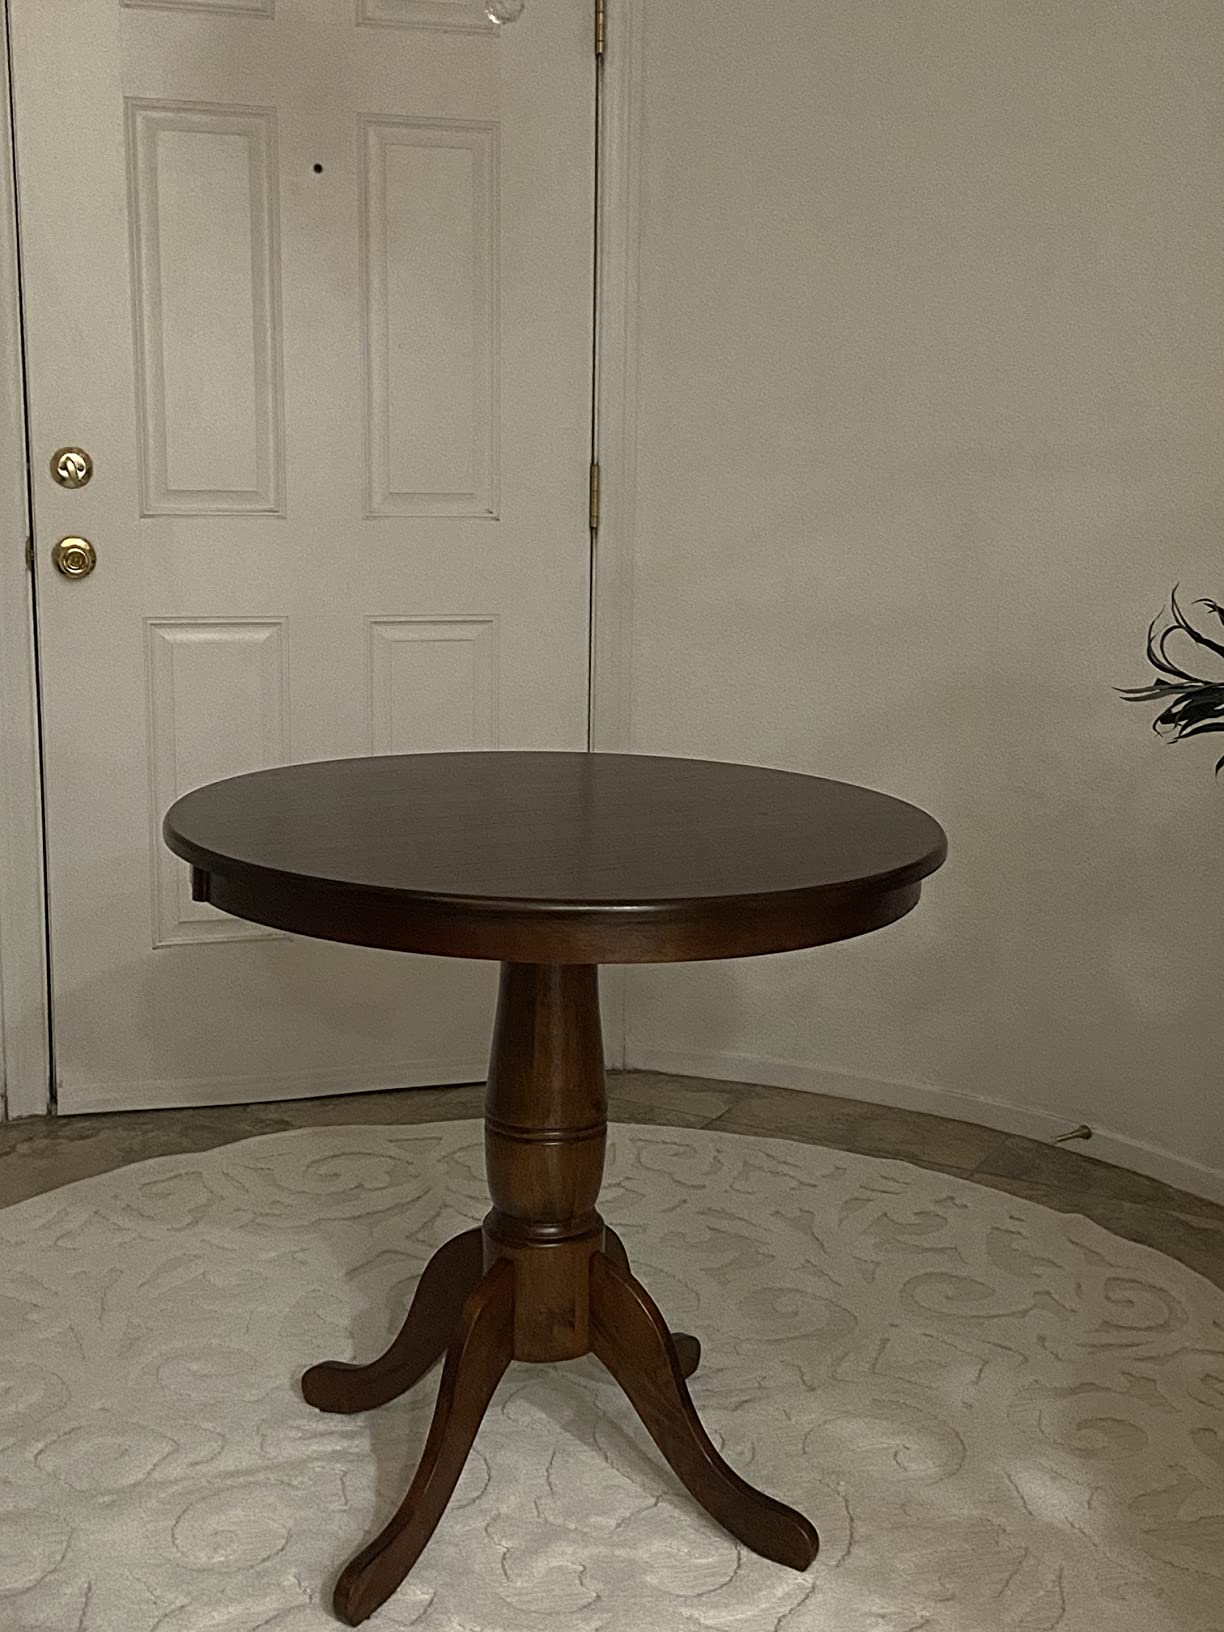 Nice table, but why the staples??